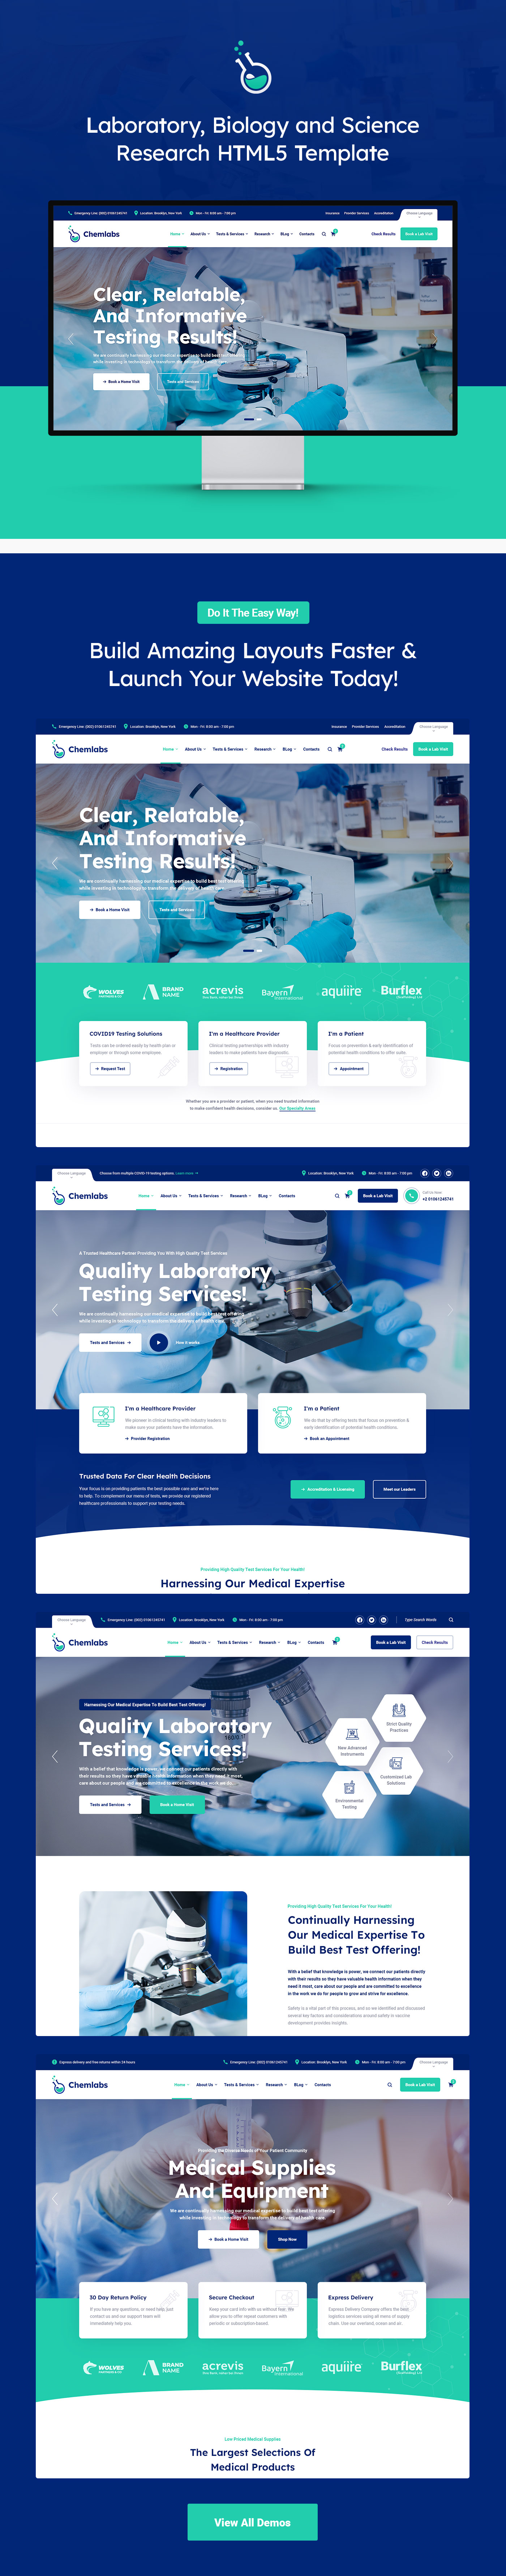 Chemlabs – Laboratory & Science Research HTML5 Template - 5